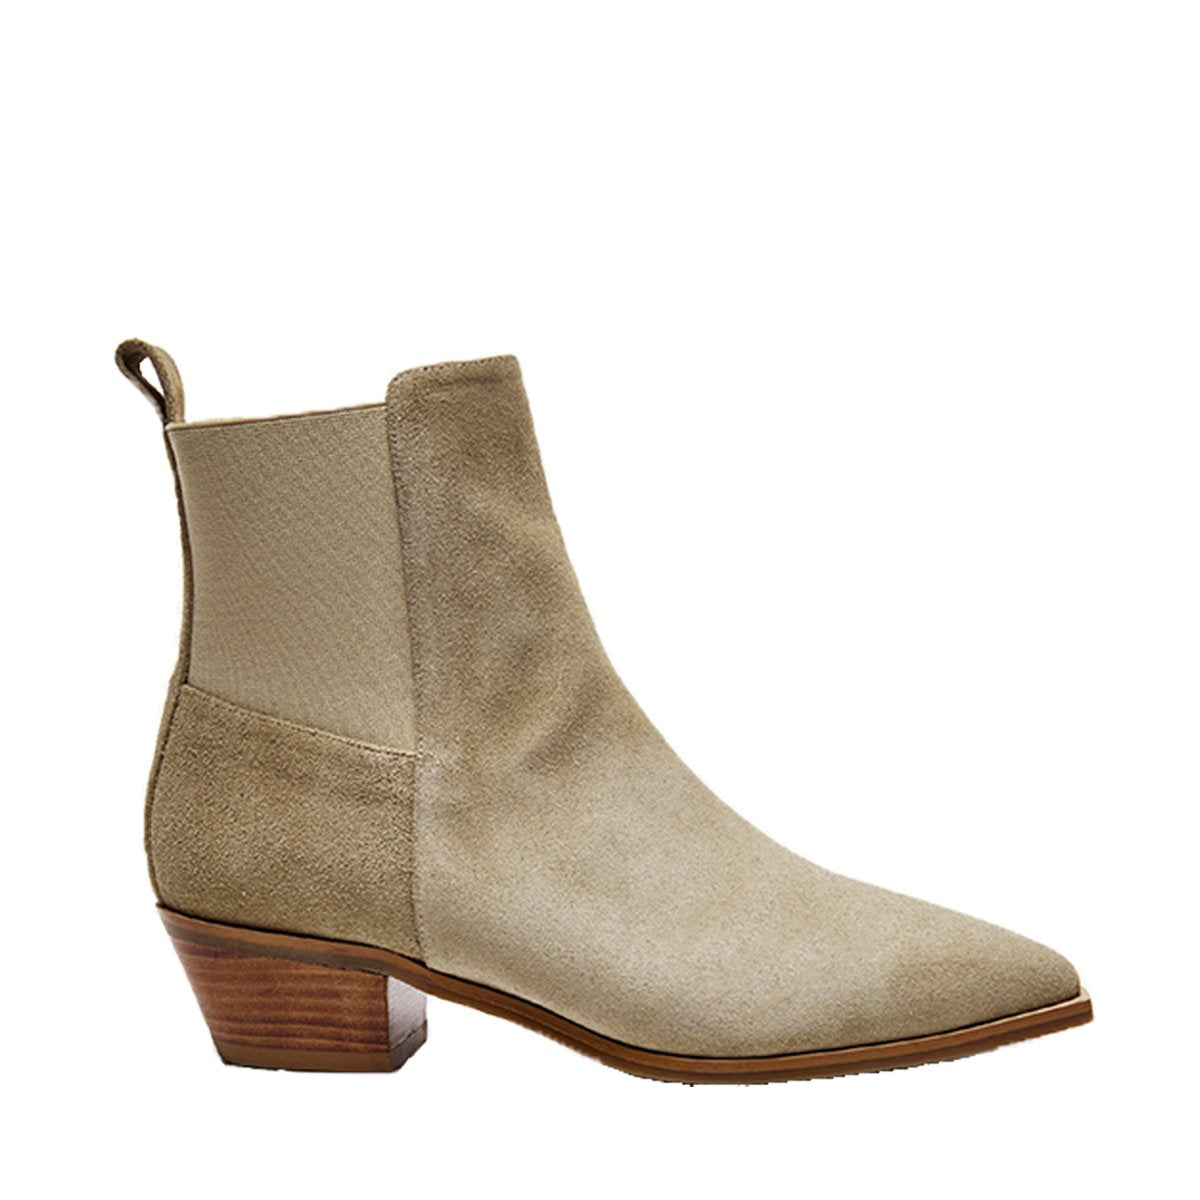 Willow Suede Sand Boots 21010814703-022 - 1